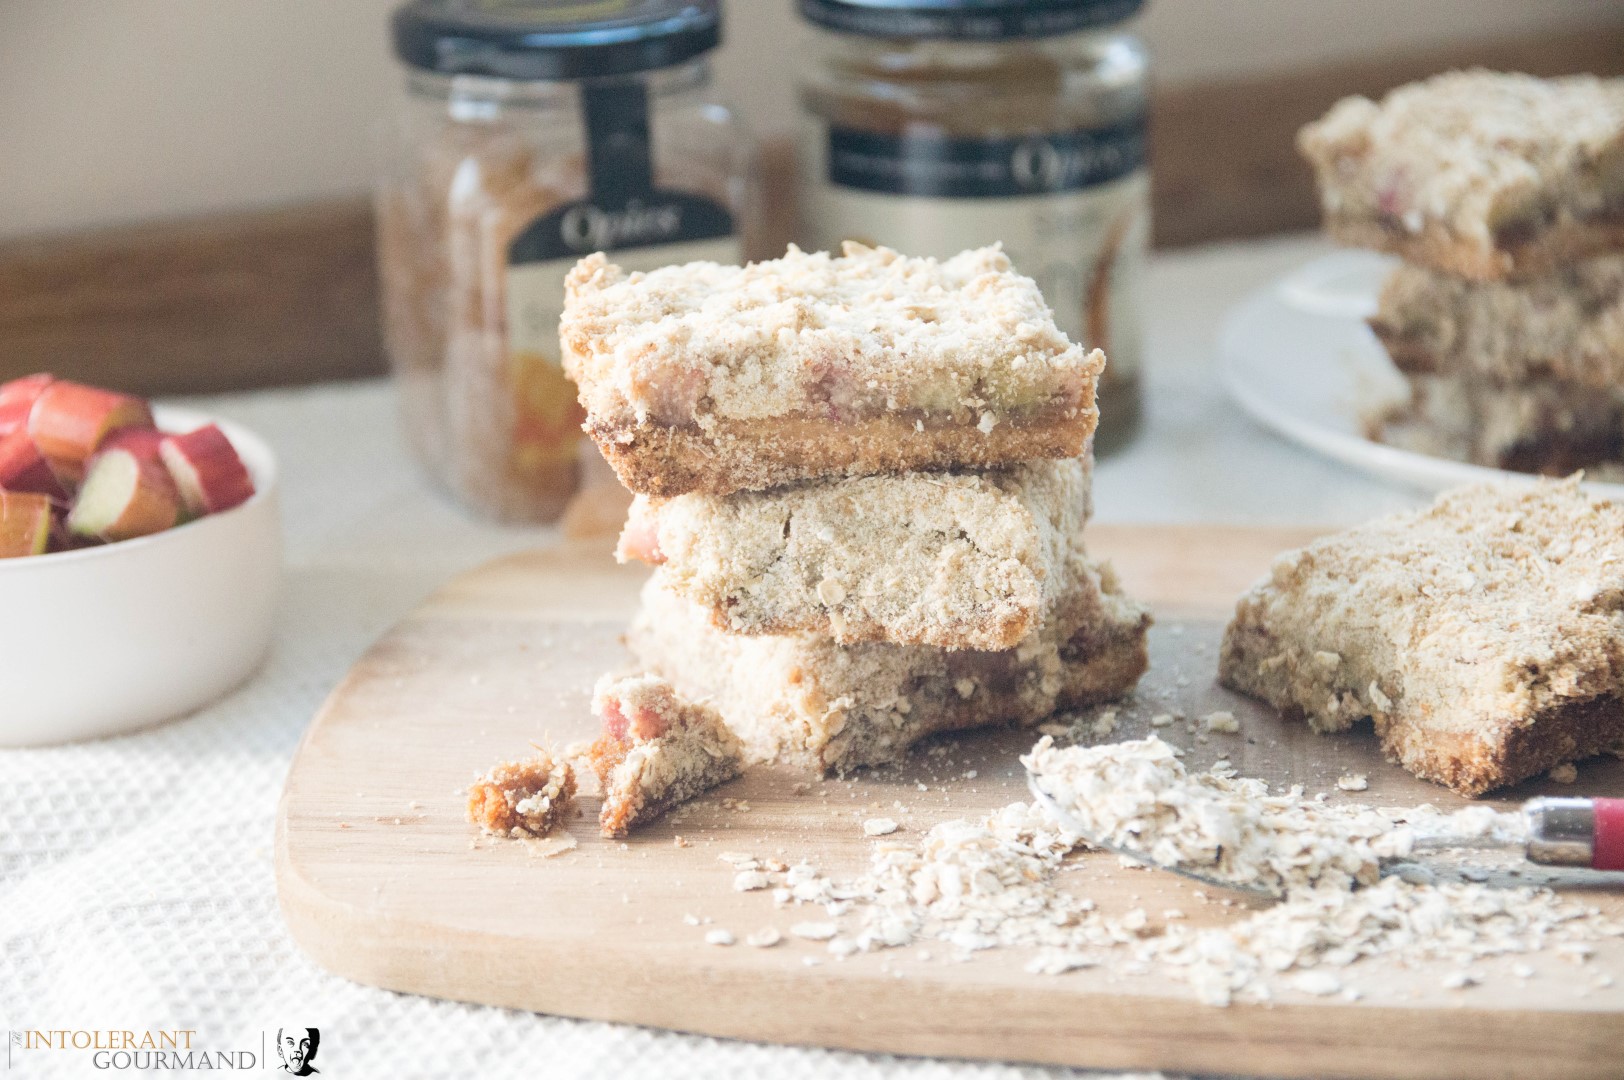 Rhubarb Ginger Crumble Bars - these delicious crumble bars are dairy and gluten free, and super simple to make! www.intolerantgourmand.com